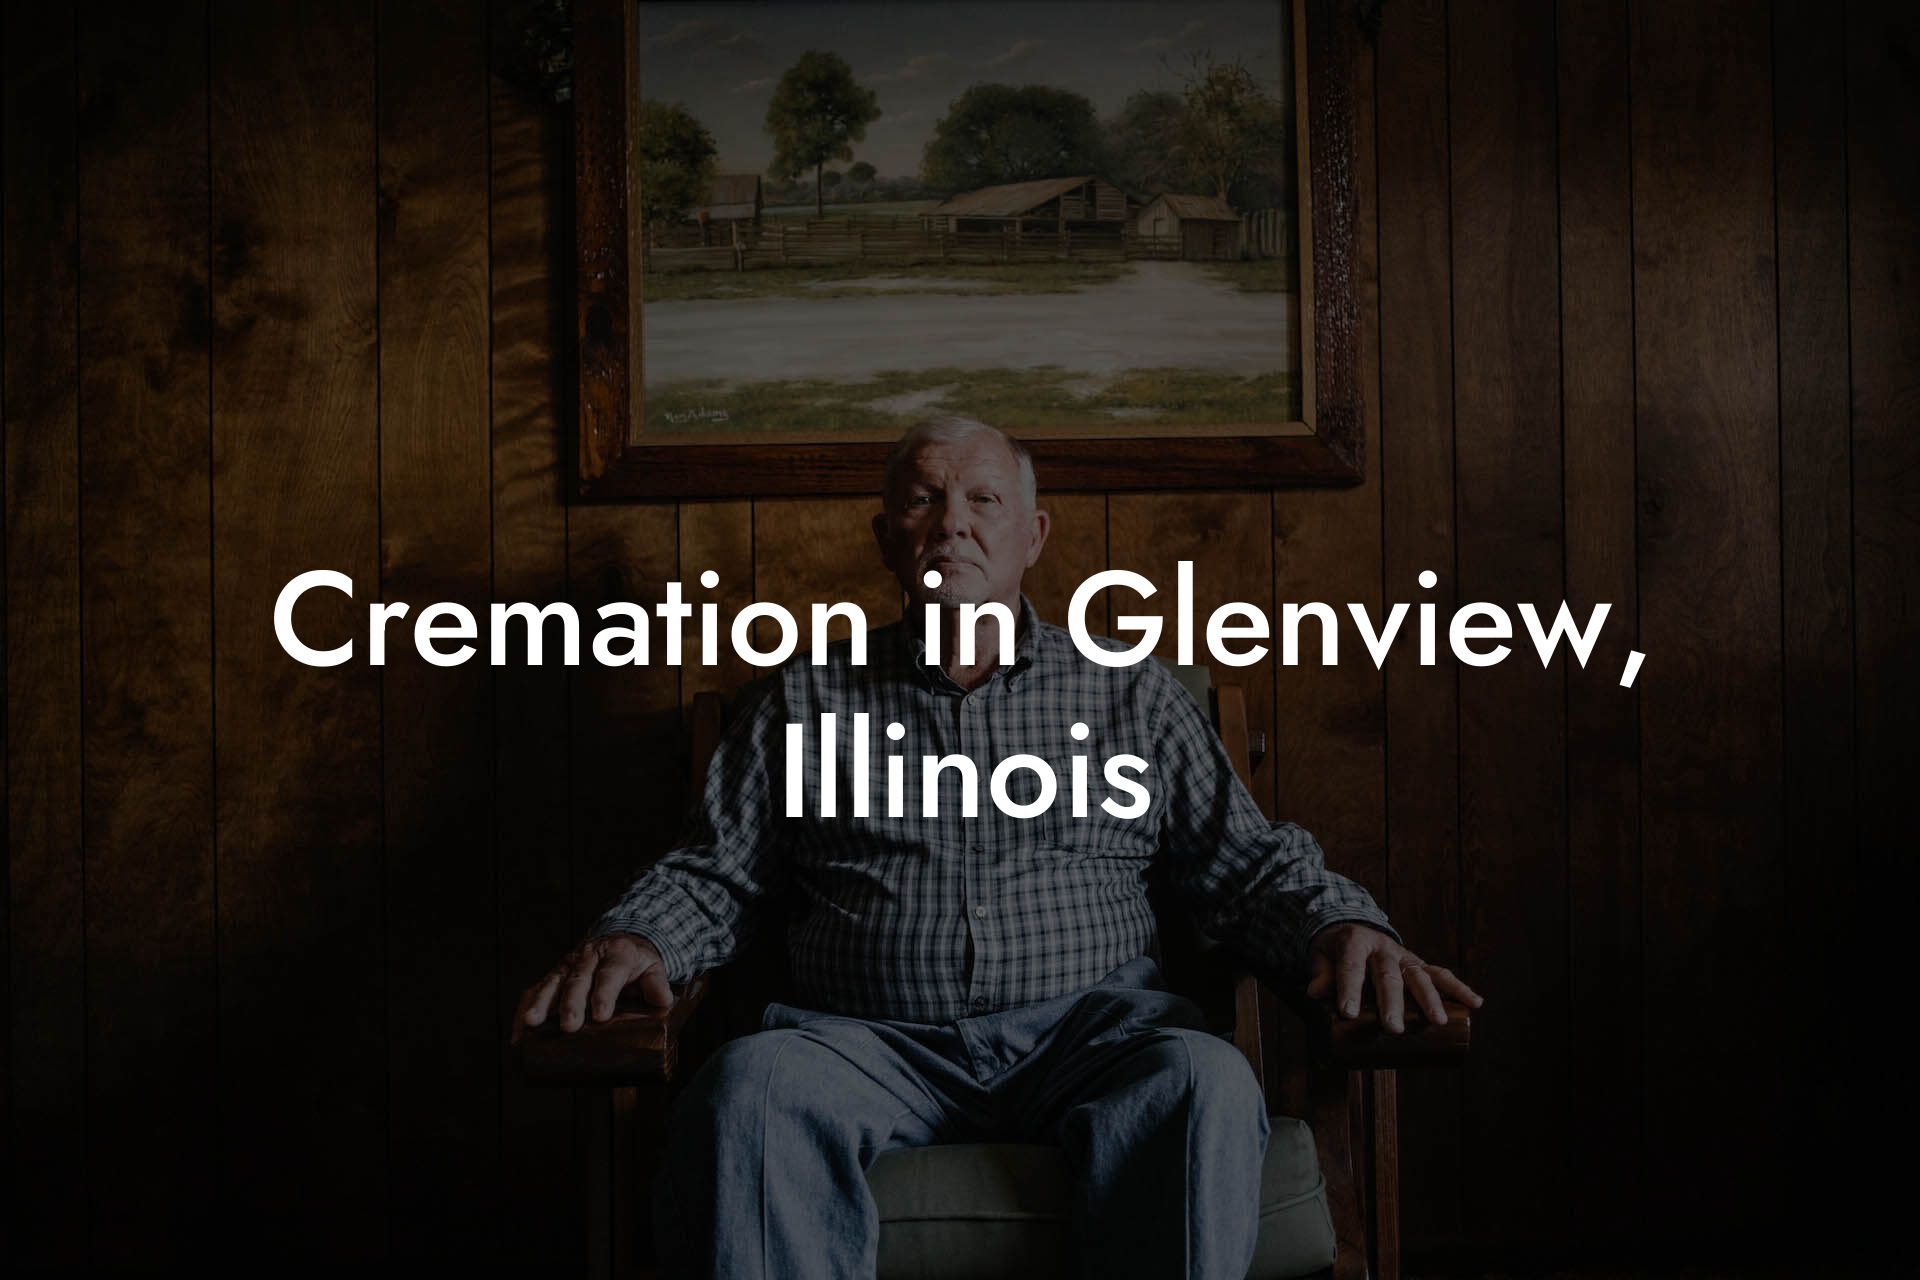 Cremation in Glenview, Illinois